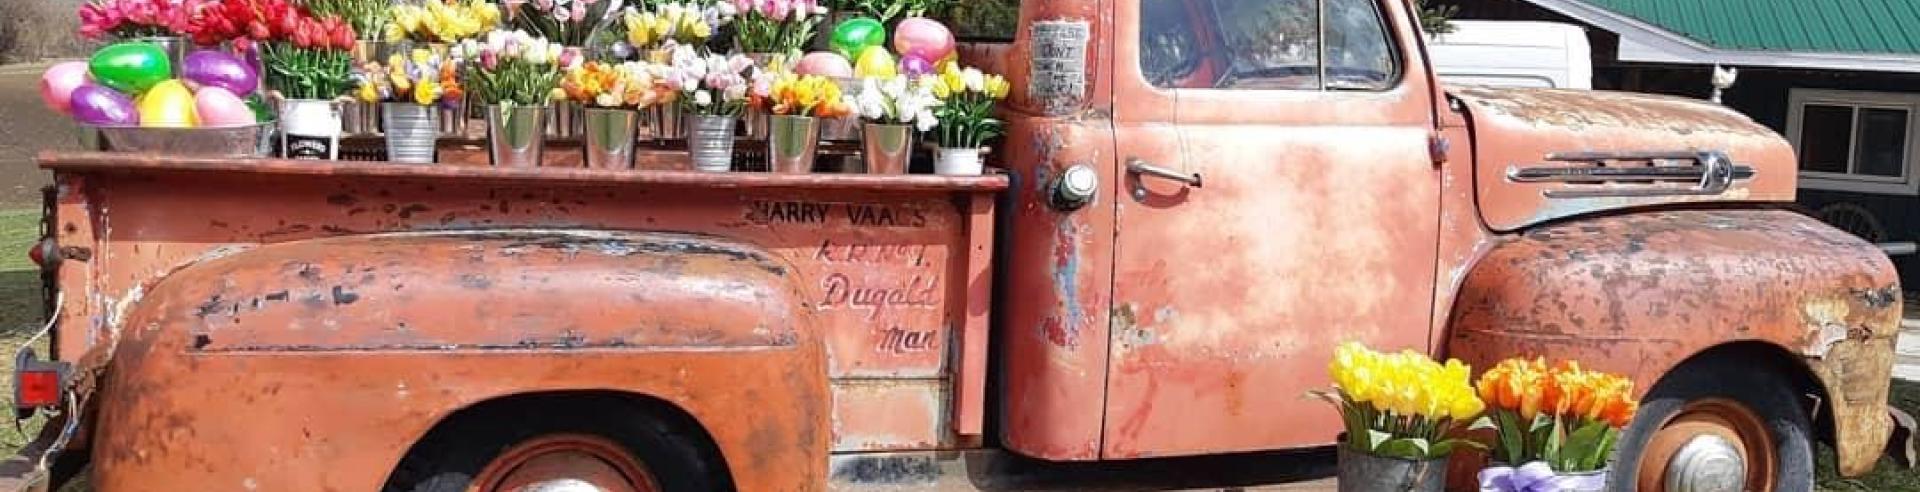 classic truck decorated with spring flowers at round the bend farm 